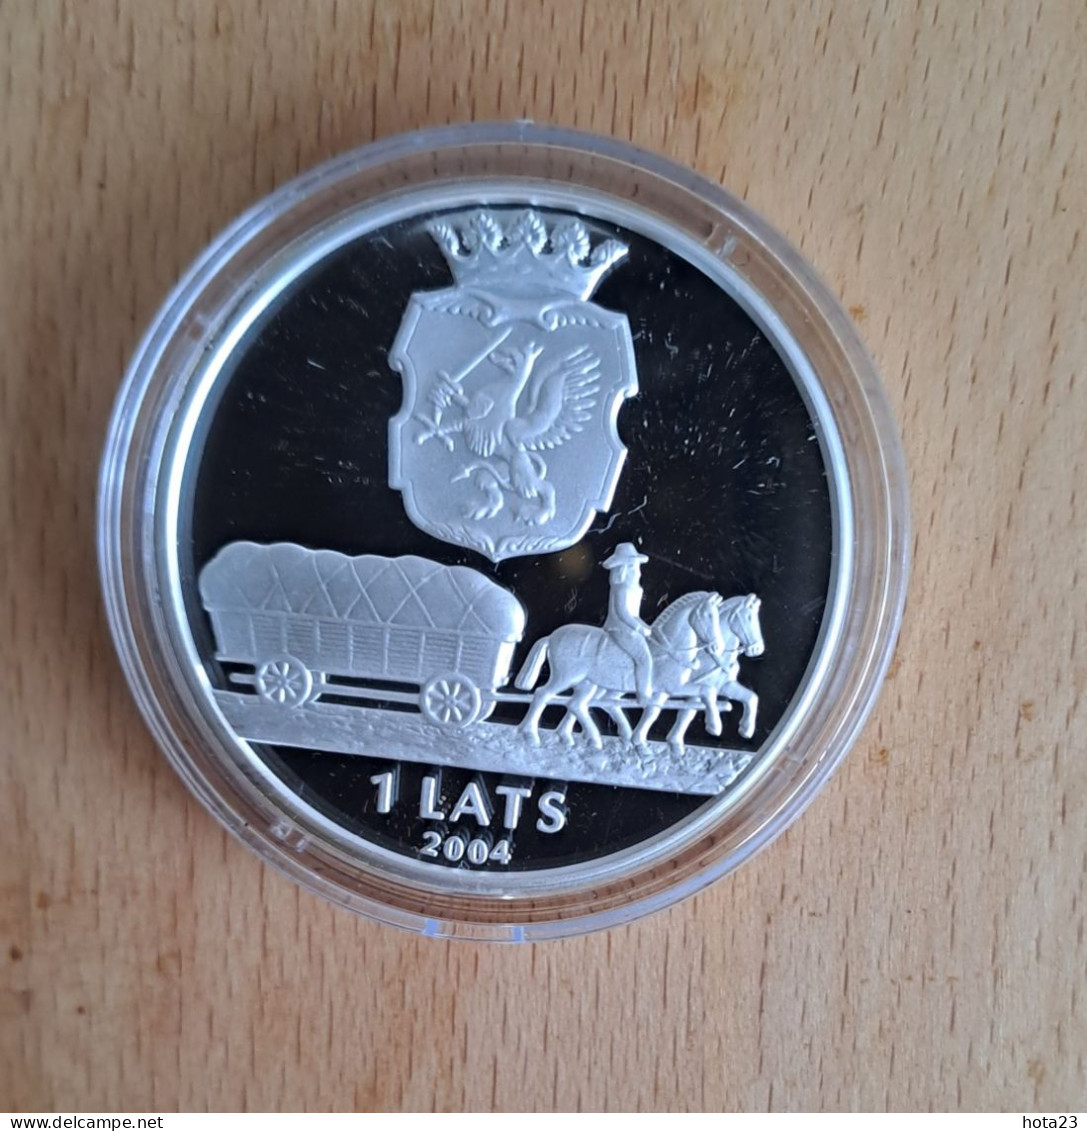 Latvia  , Lettonia , Lettland - 1 Lats Silver Coin  Vidzeme Horse Carriage ; Ploughboy   2004  Y Proof - Latvia